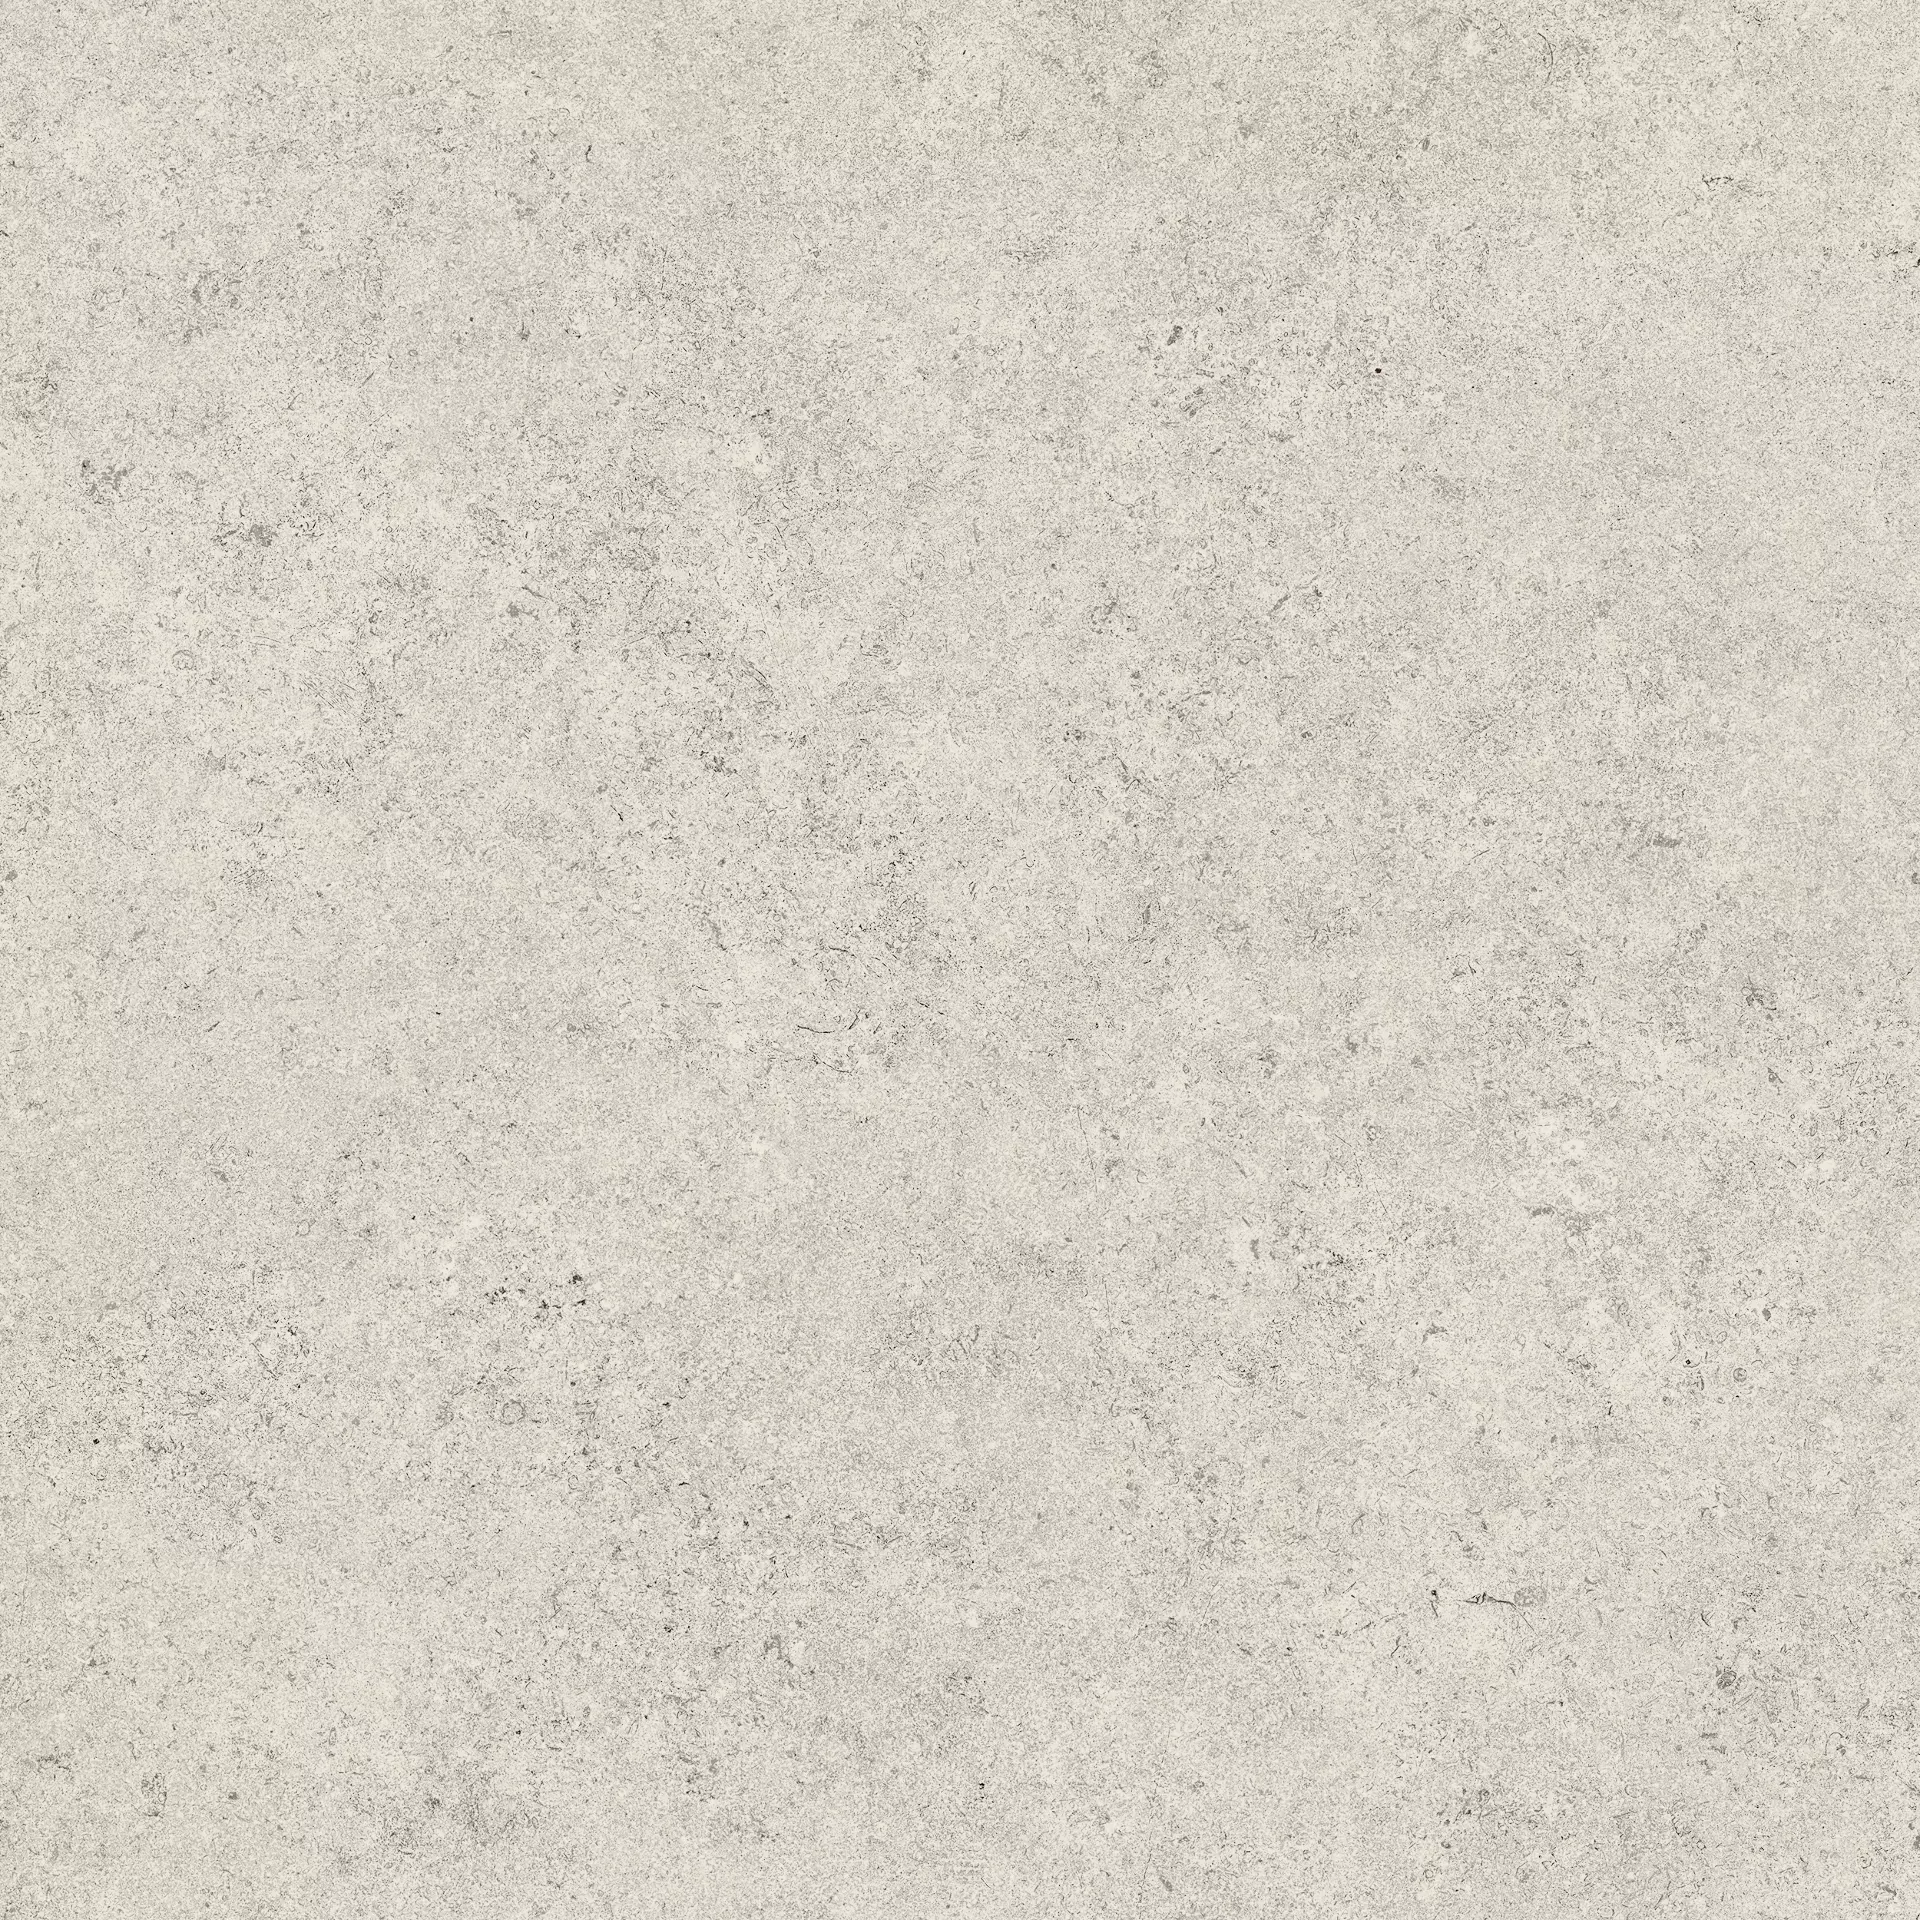 Cottodeste Pura Pearl Rolled Protect EGWPR25 60x60cm rectified 14mm